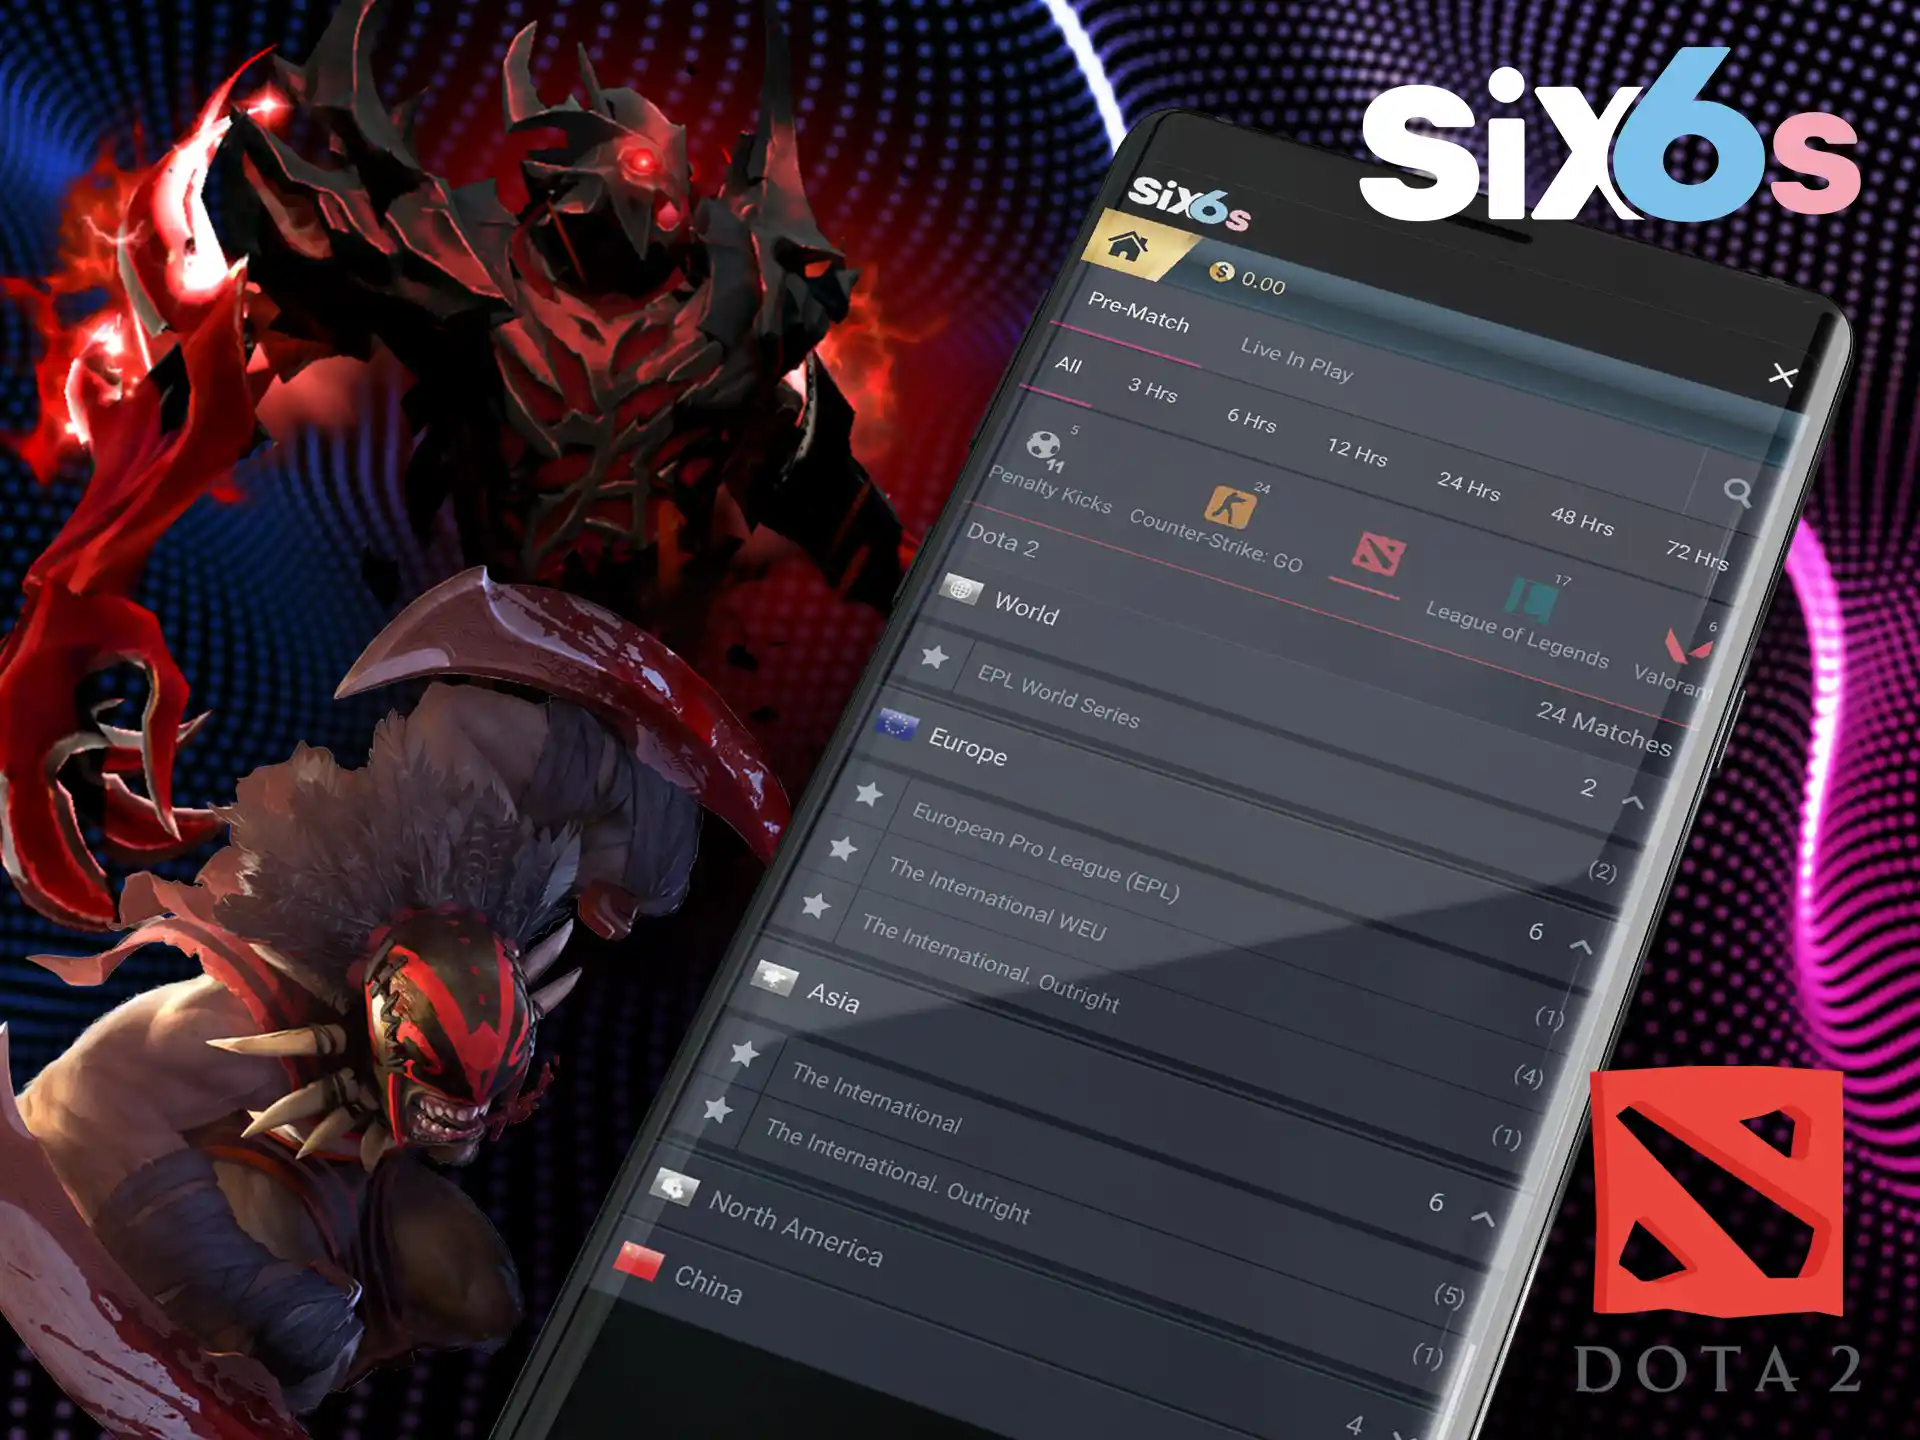 Online cyber sports betting with Six6s on Dota 2.